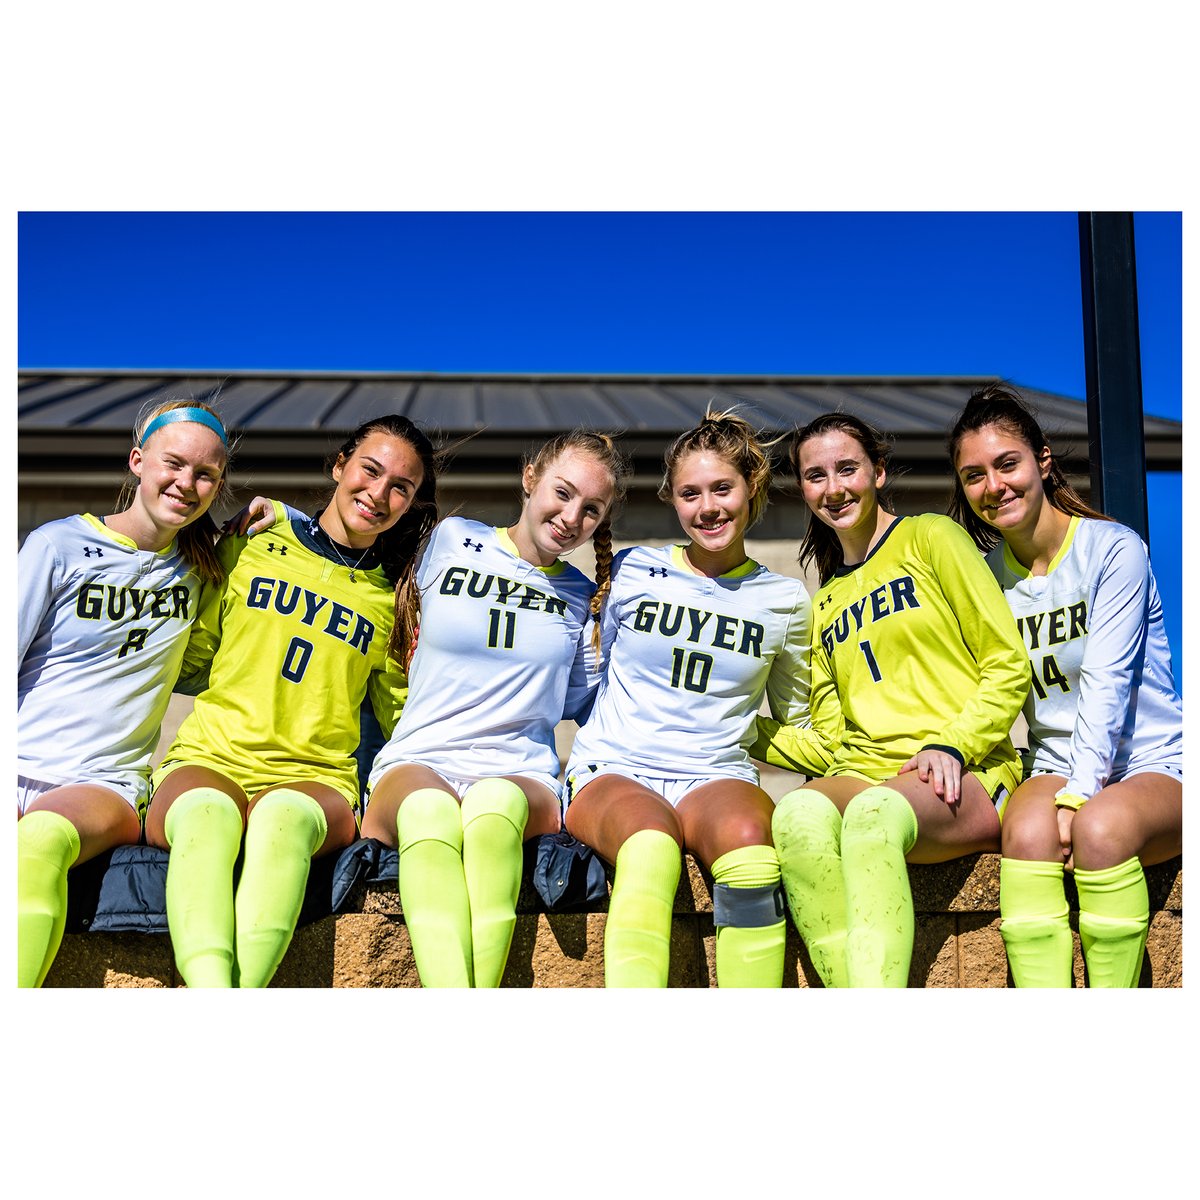 I can't imagine what they feel each time they step on the field together this year. #seniors

#seniors2023 #ladywildcats #wildcats #highschoolsoccer #varsity #memories #soccer #futbol #soccerlife #guyerhighschool #pixrguy #sportsphotography